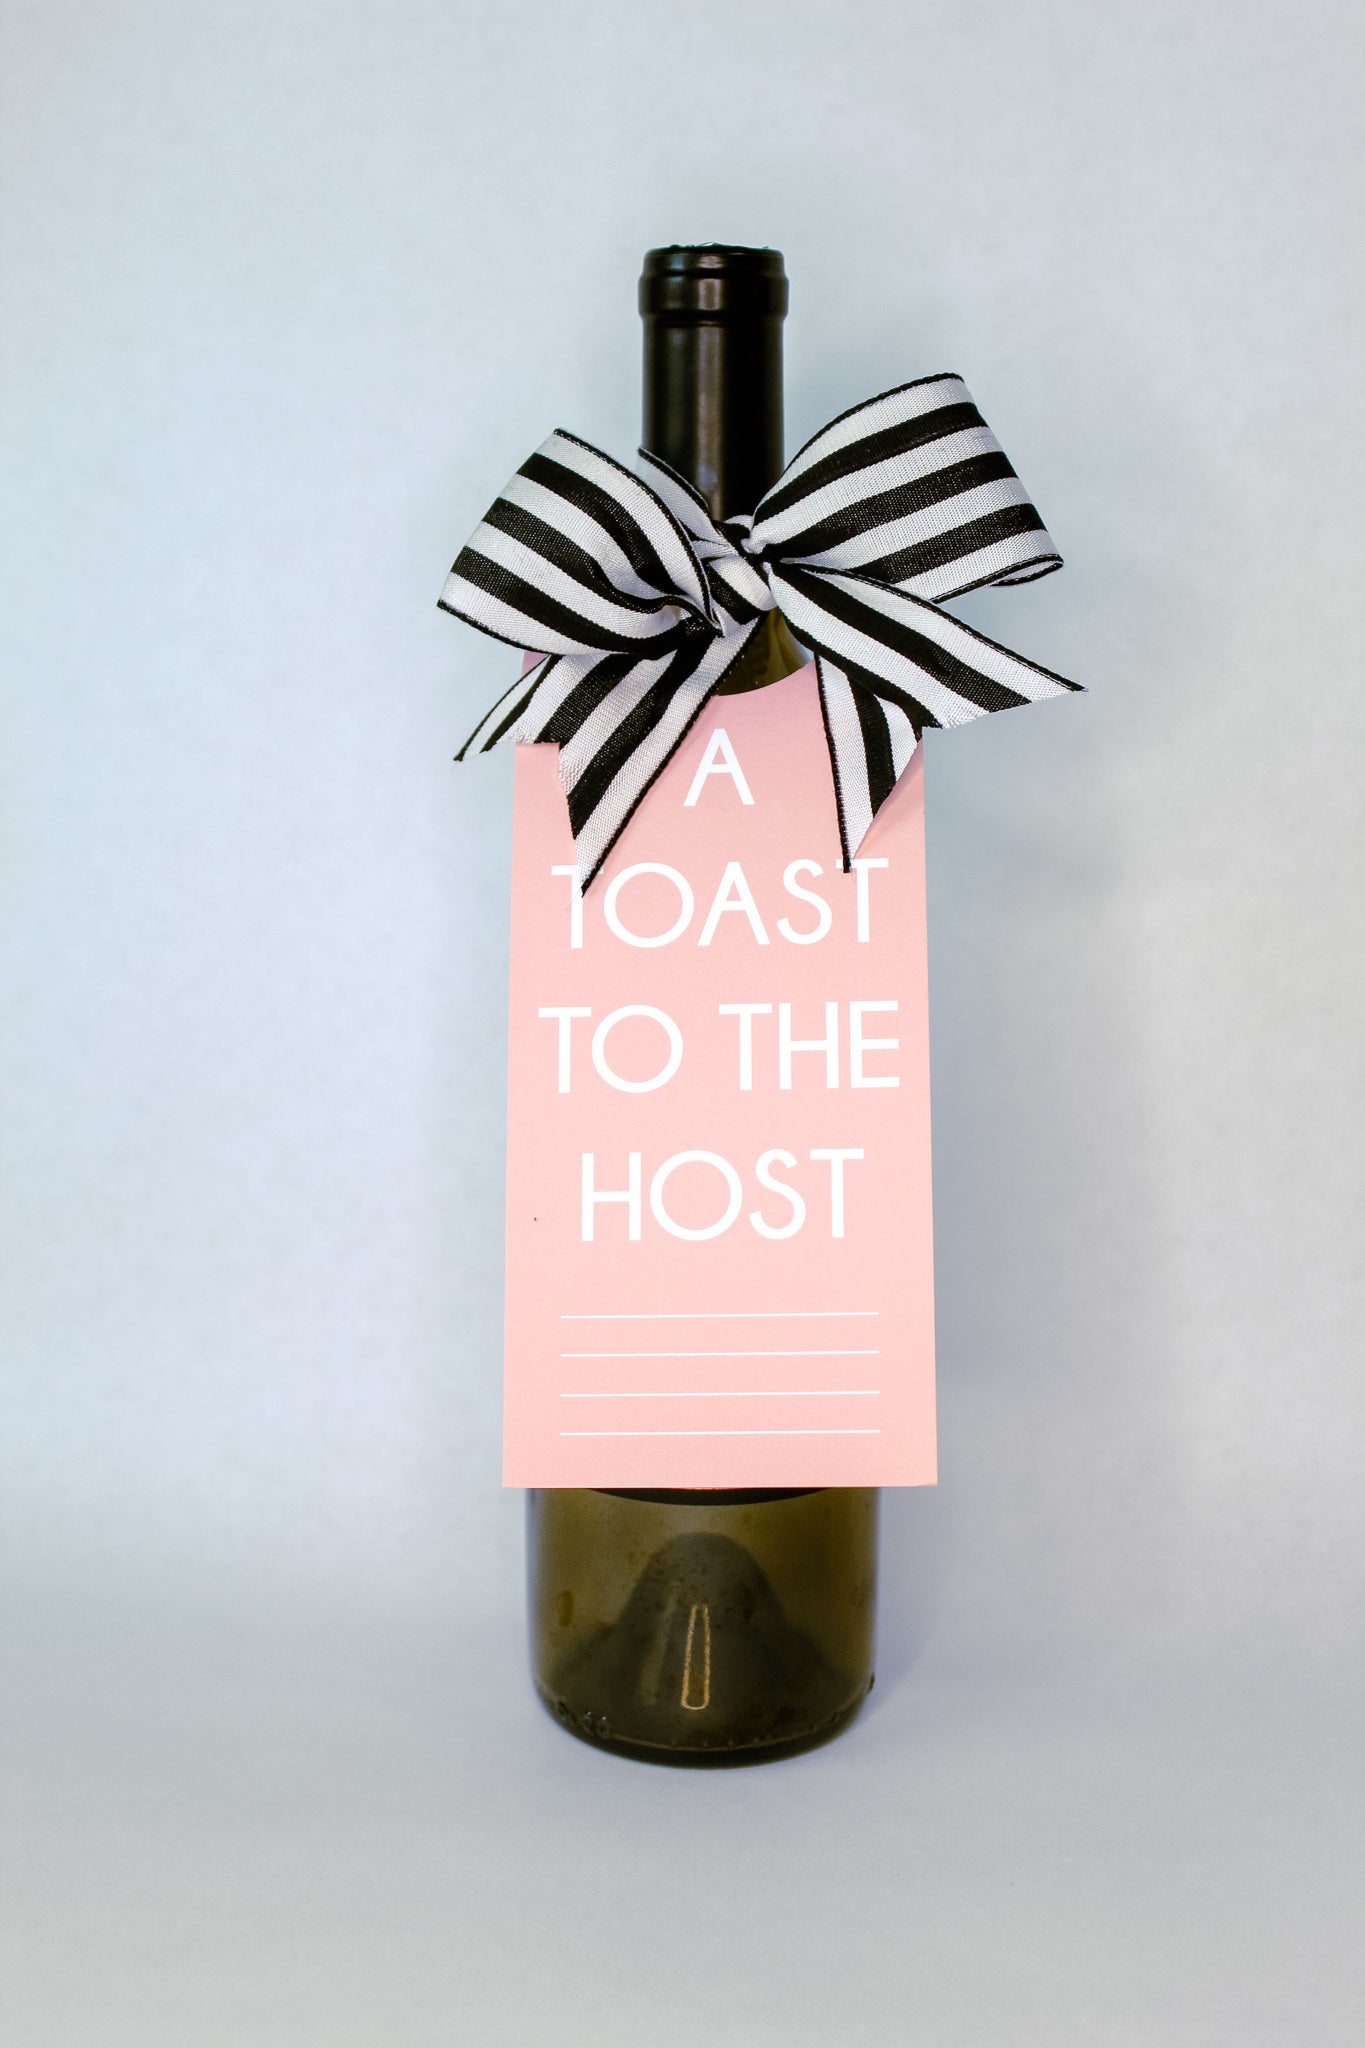 A Toast to the Host Bottle Neck Gift Tags